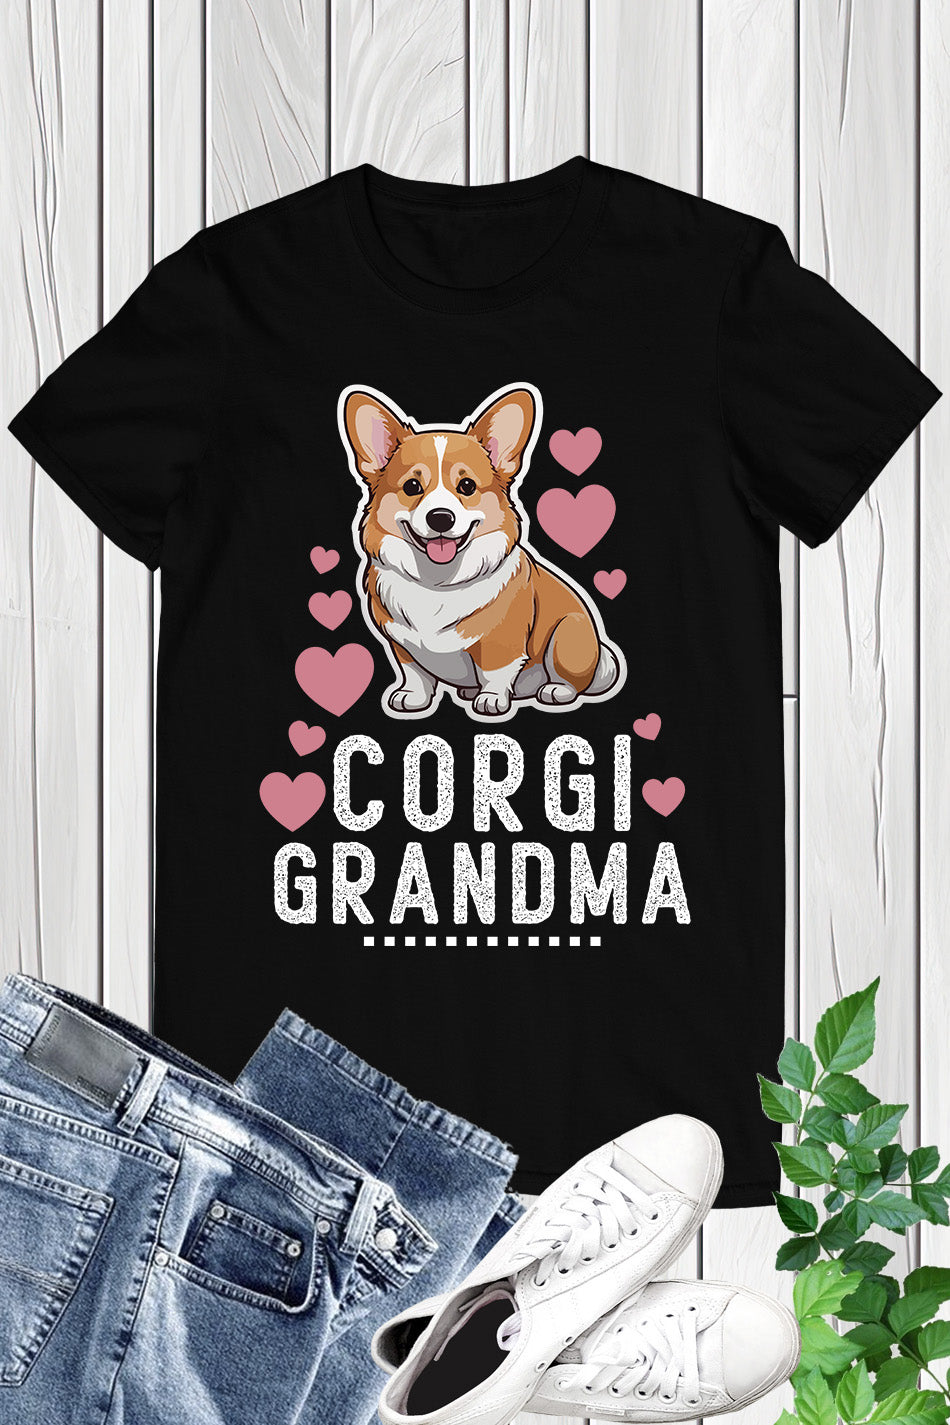 This Corgi Grandma Funny Dog Lover Shirt is perfect for any dog lover. With its unique design and comfortable fit, it is both stylish and practical. Show off your love for corgis and add this shirt to your wardrobe today!